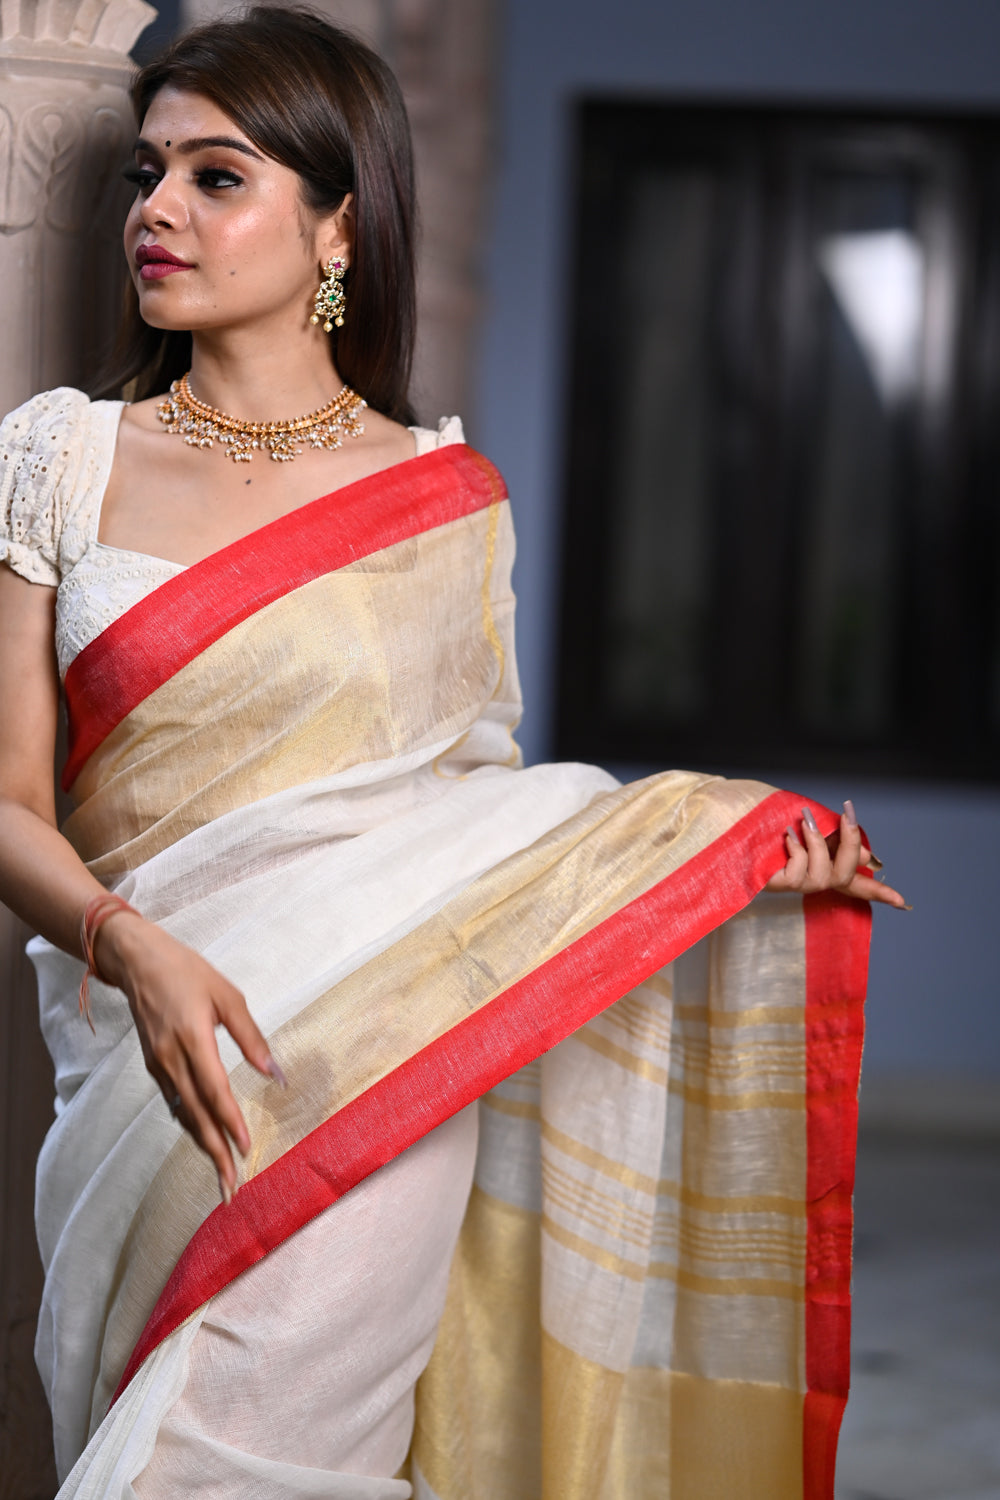 Wide Border Linen Saree in Ivory and Red with Gold Zari | Lal Paar Saree I White and Red Saree